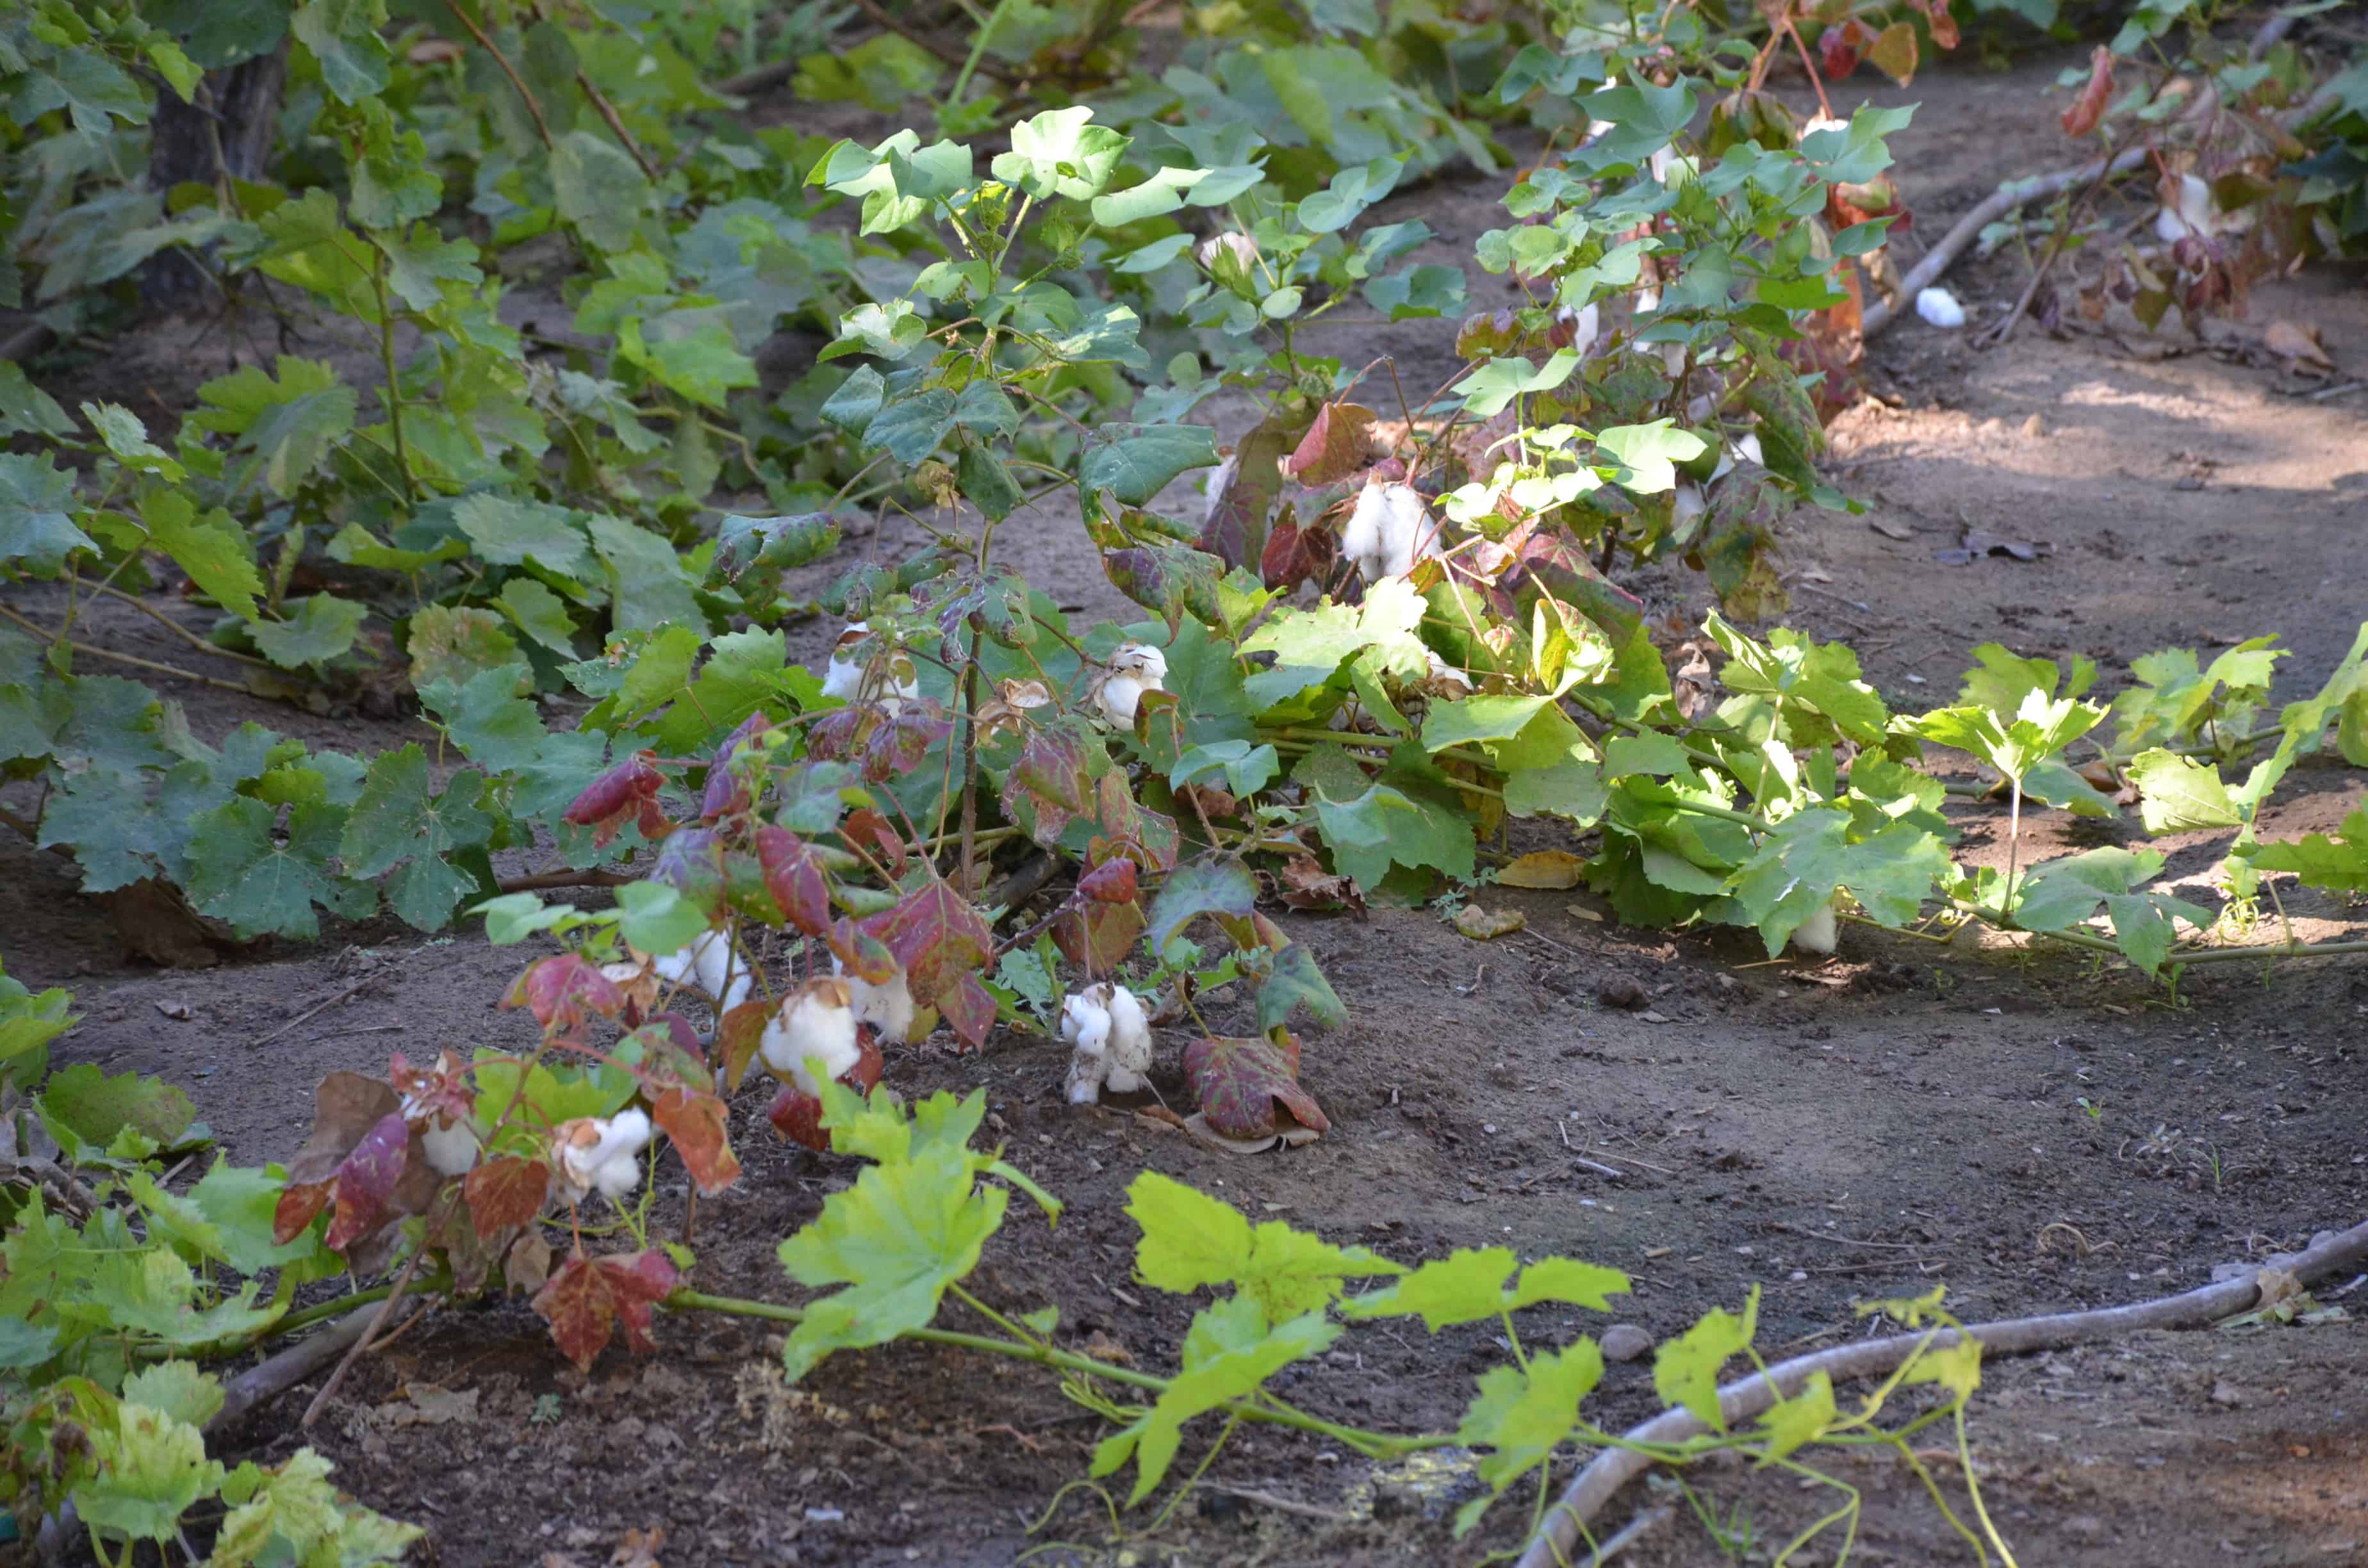 Cotton at the Brigham Young Winter Home in St. George, Utah